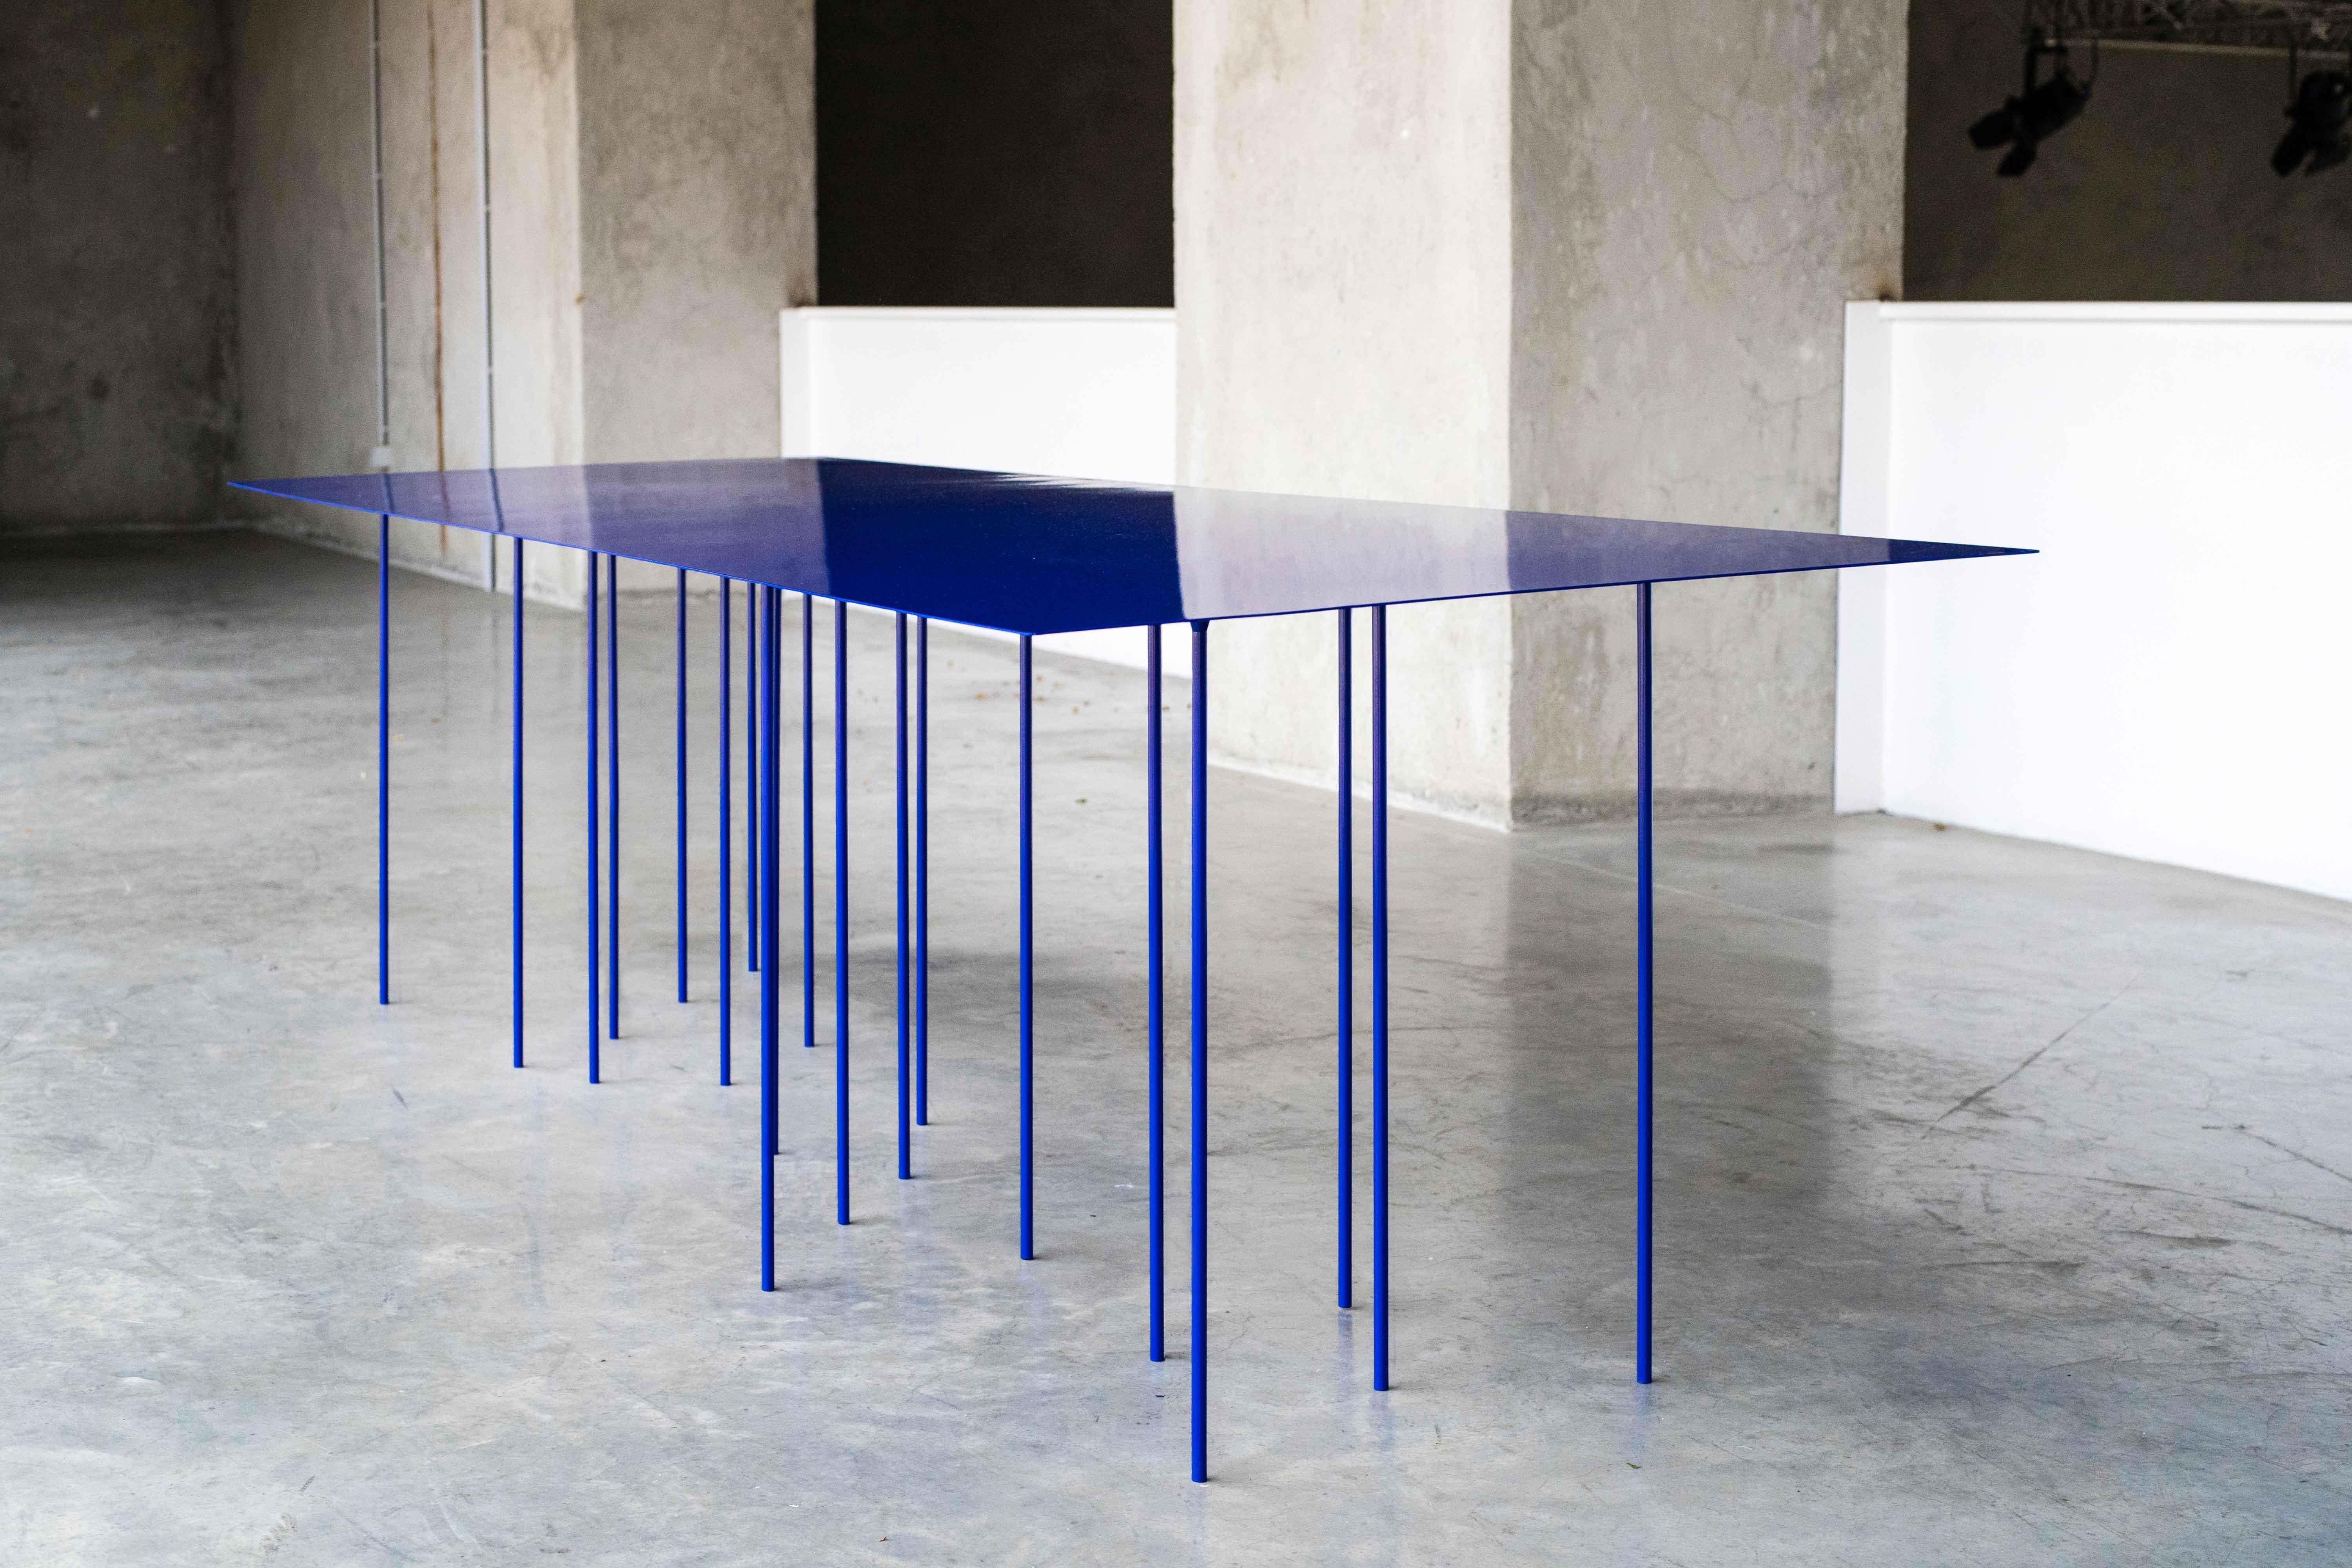 TTTTable by MOB 
Designer: BAST (France)
Dimensions: H 72 x D 110 x W 300 cm
Material: 2mm steel sheet, 2mm aluminium sheet, 10mm steel bar, Klein Blue medium glossy painting.

The board of a table is much more than a mere support: it is a line